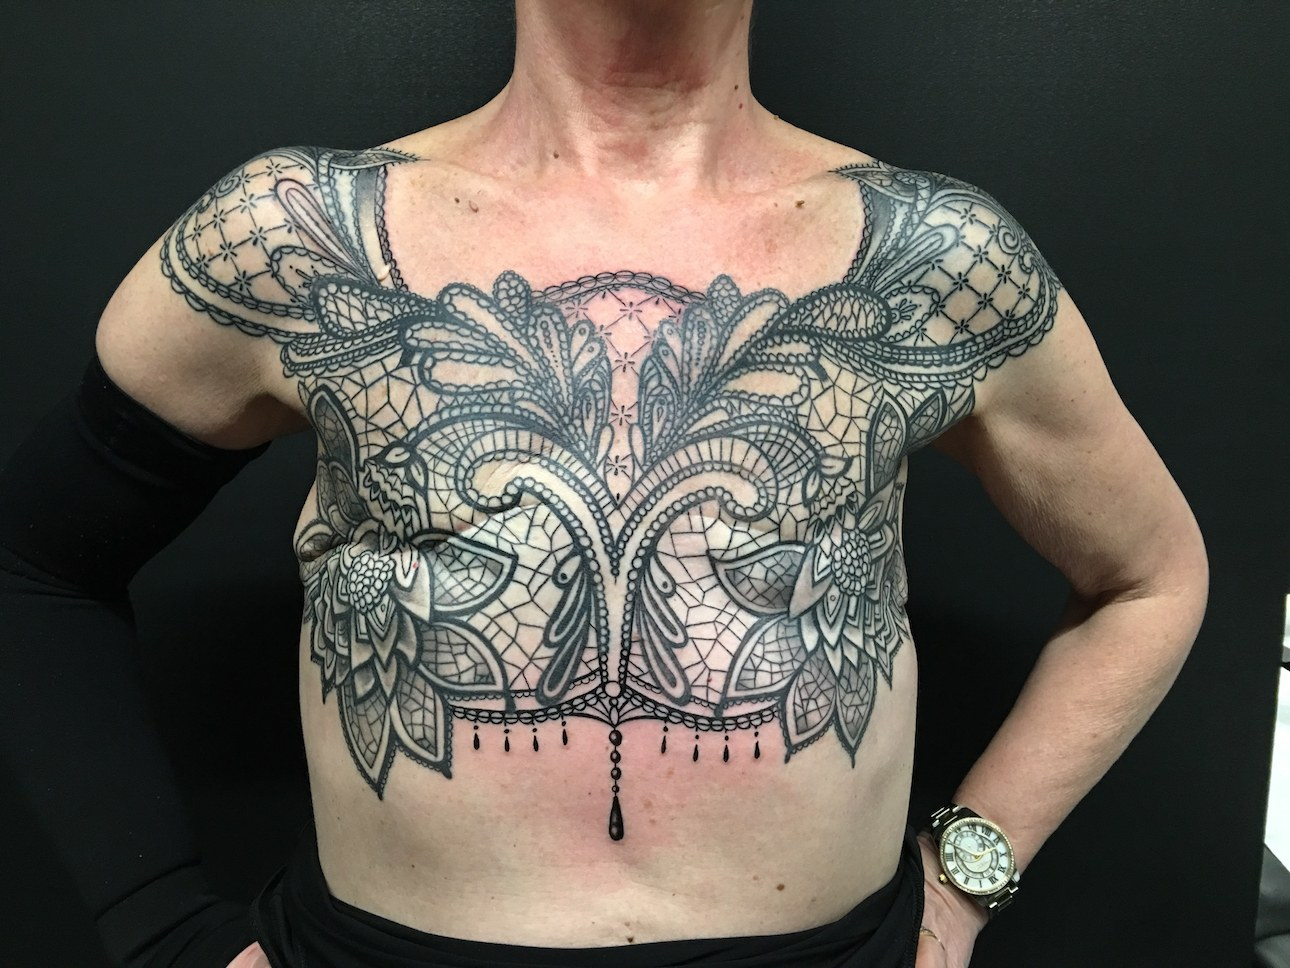 This Woman Got An Incredible Mastectomy Tattoo On Her Chest Self within sizing 1290 X 968